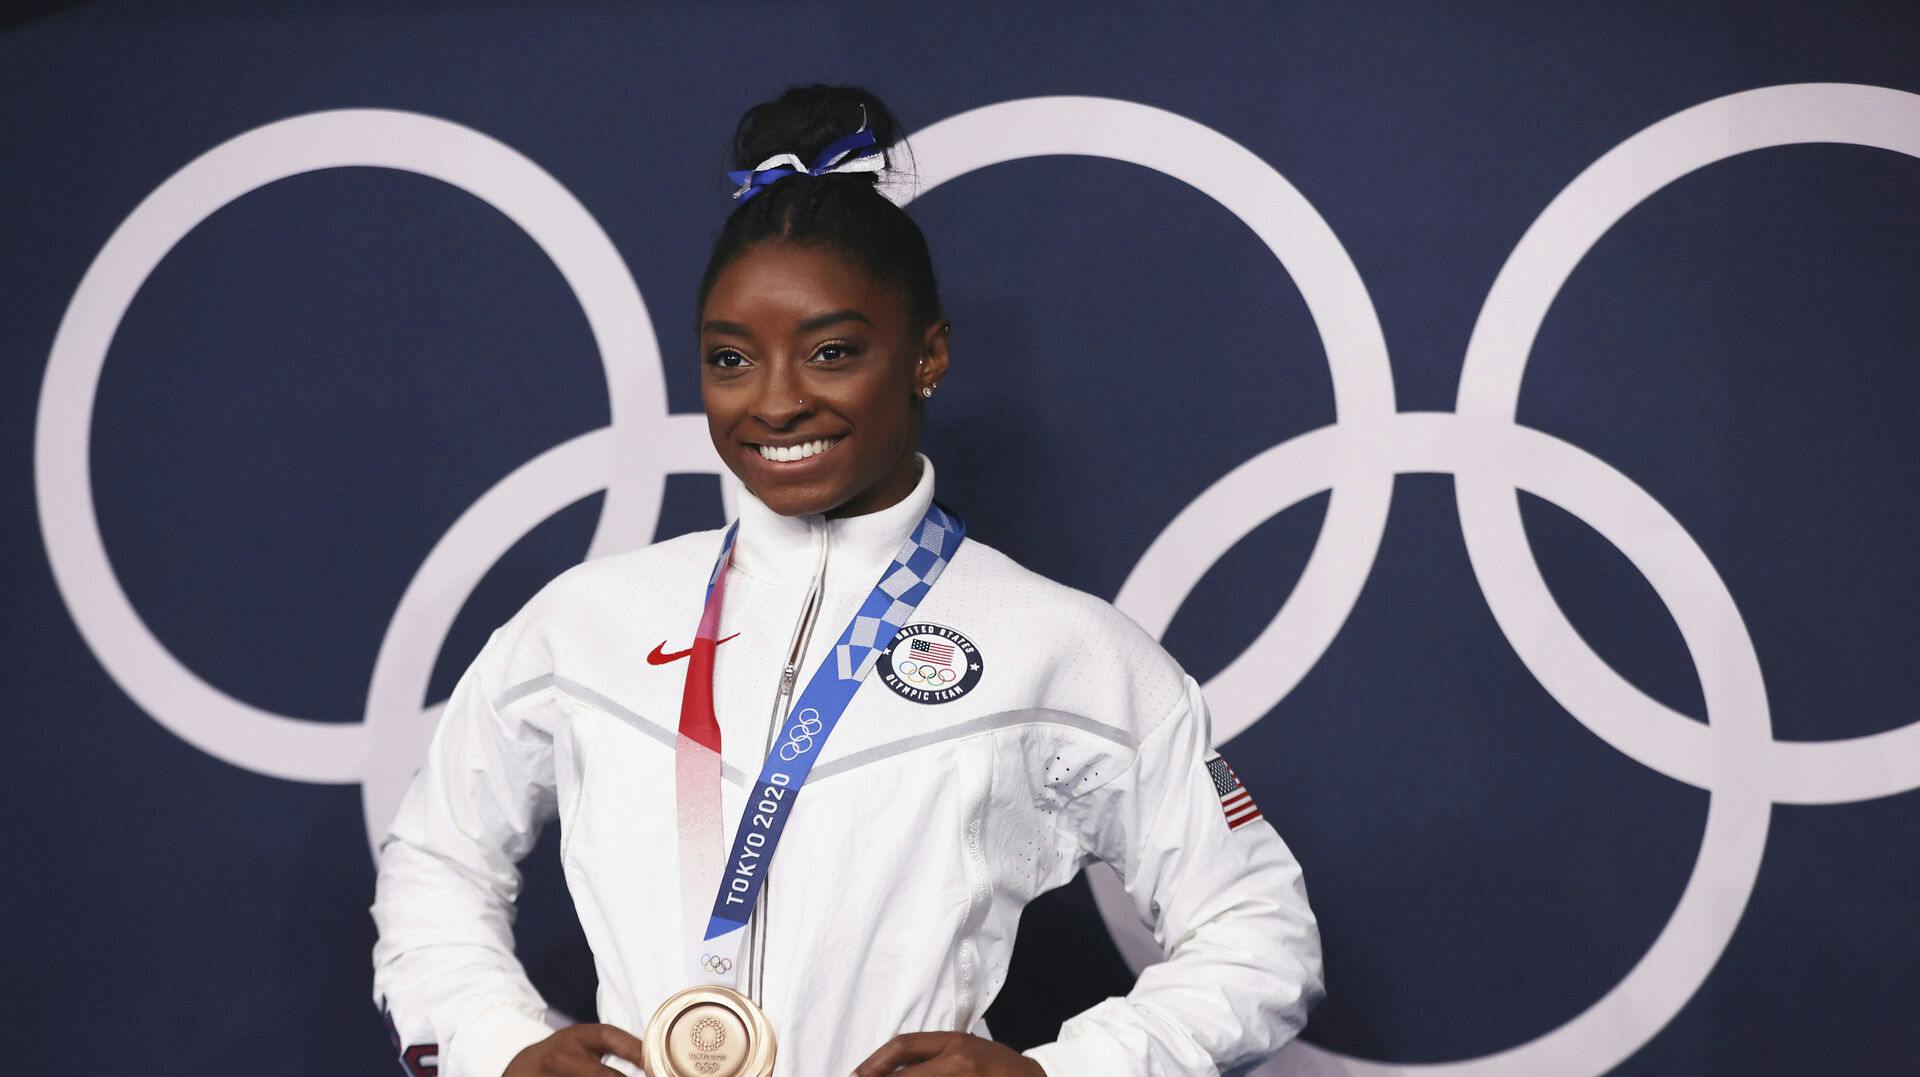 Simone Biles bliver anset for at være gymnastikkens G.O.A.T. - greatest of all time.&nbsp;